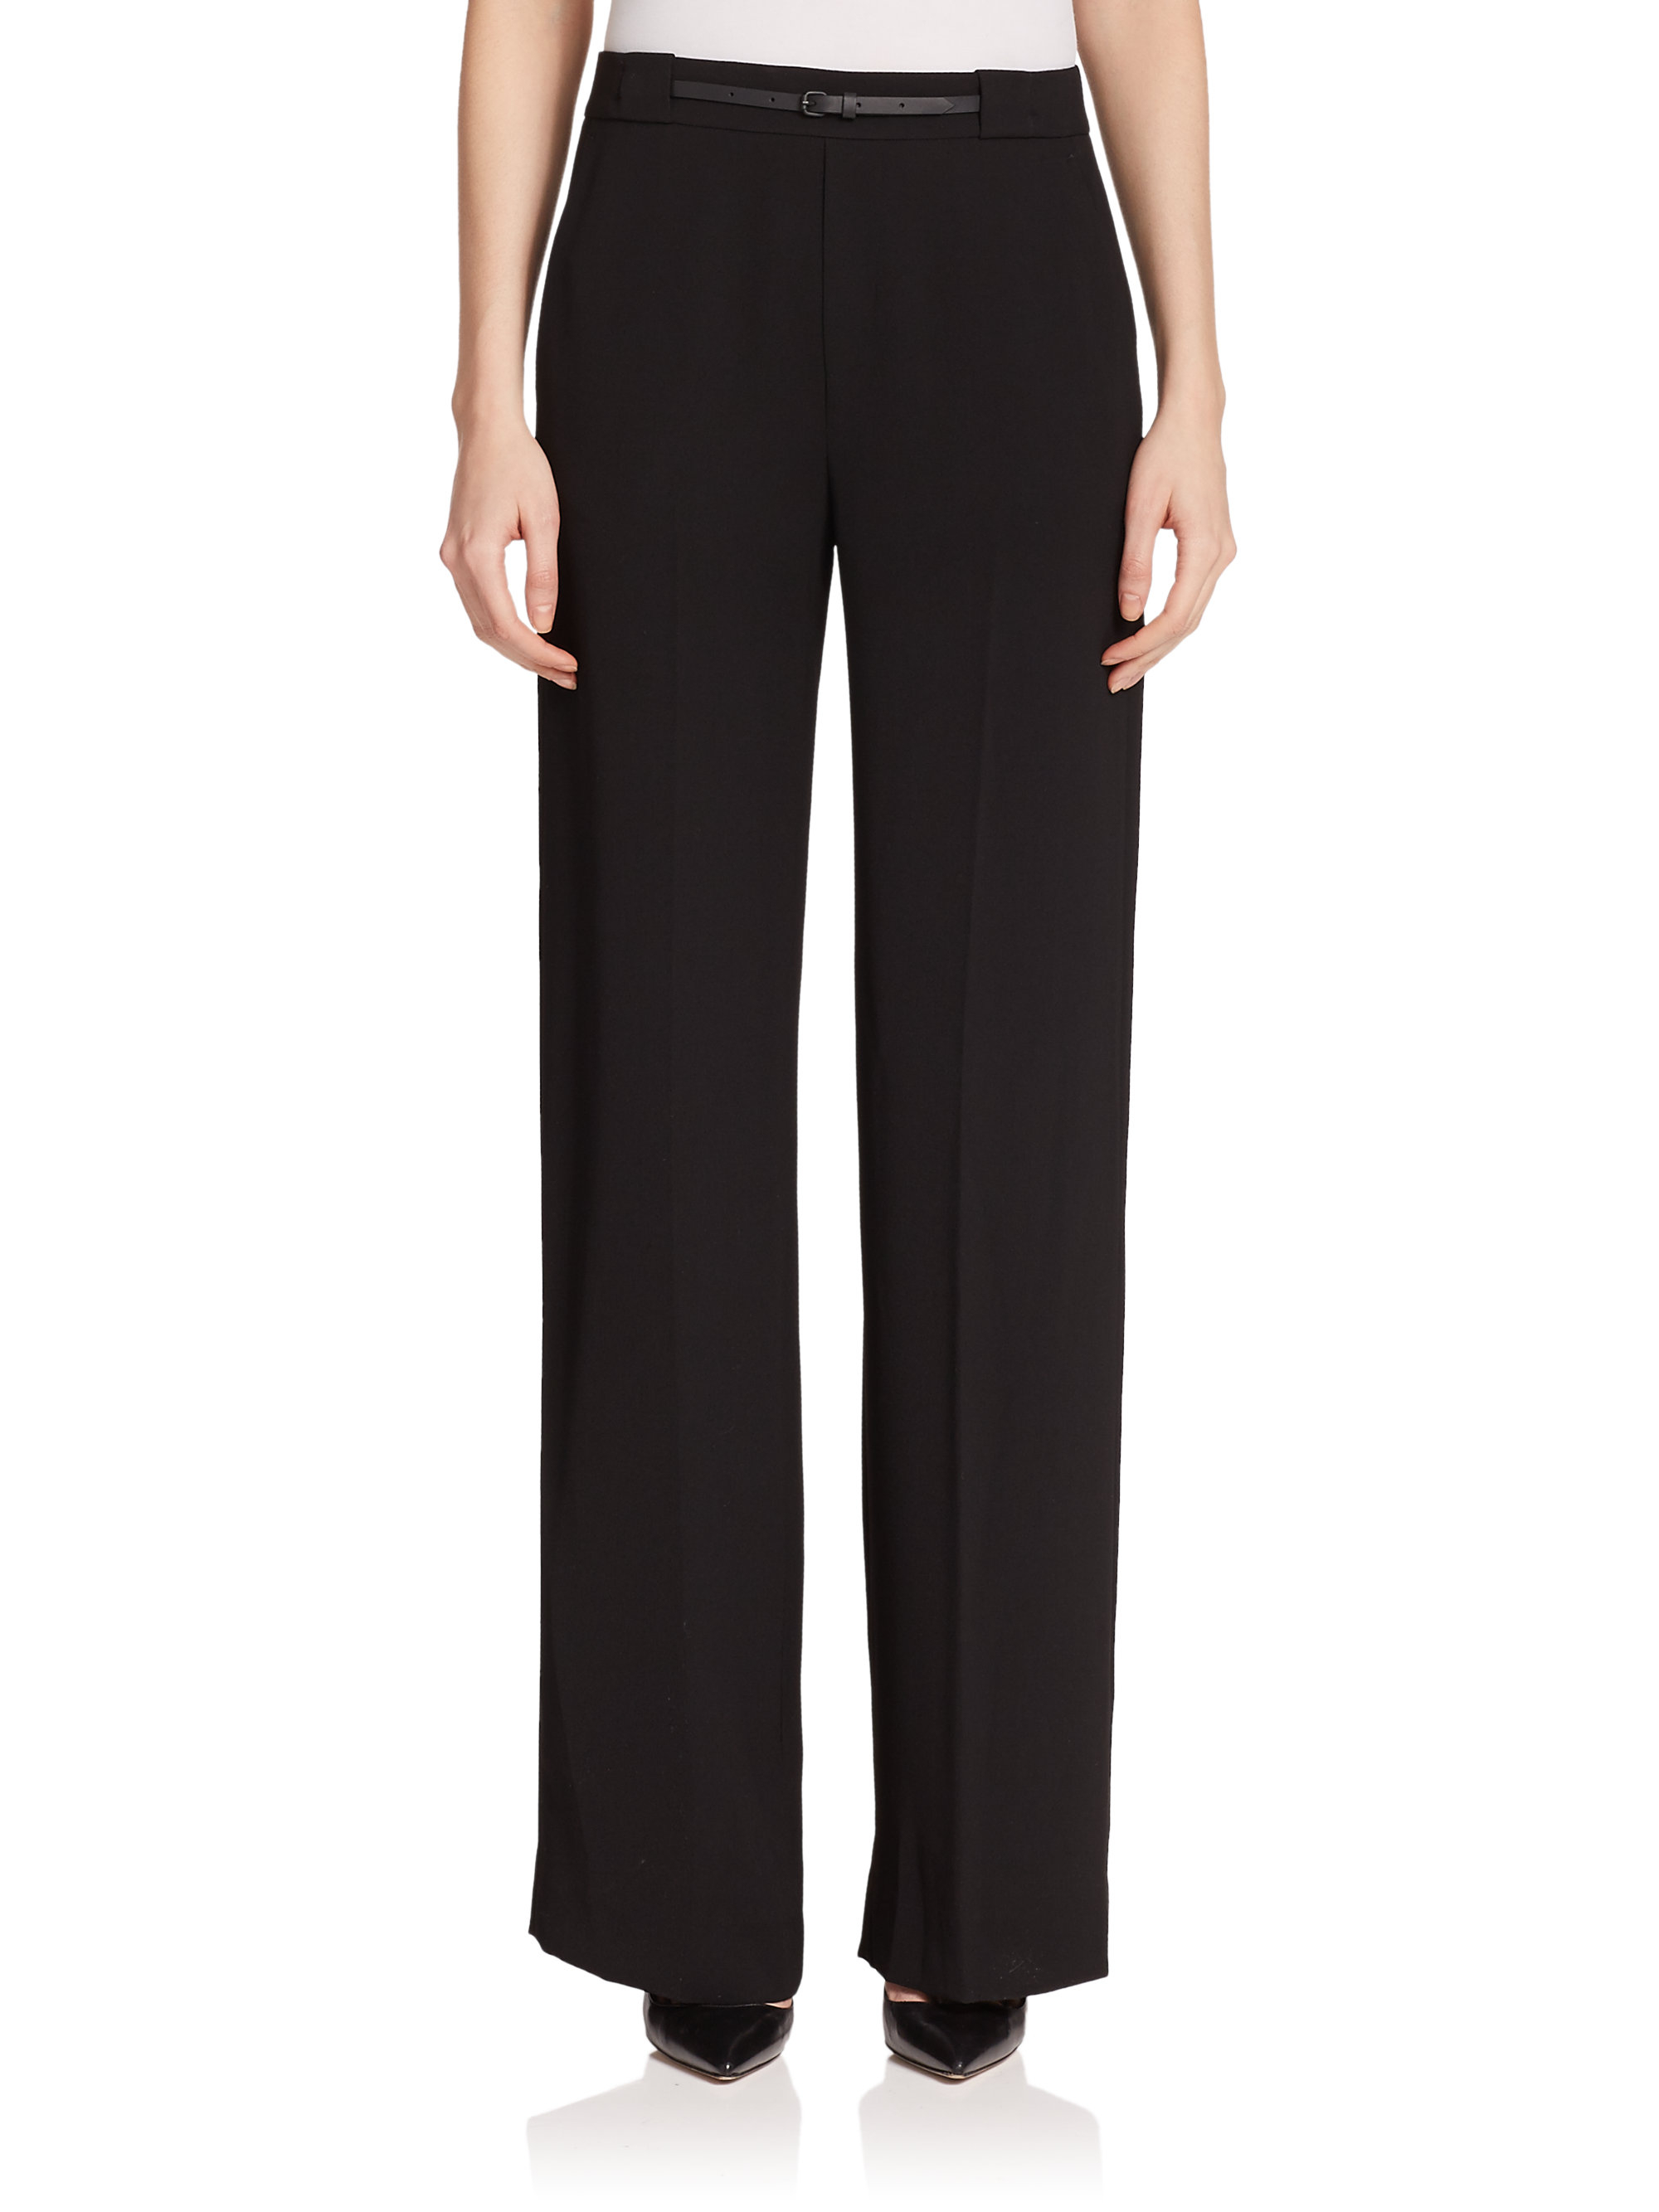 Vince Belted High-waist Pants in Black - Lyst